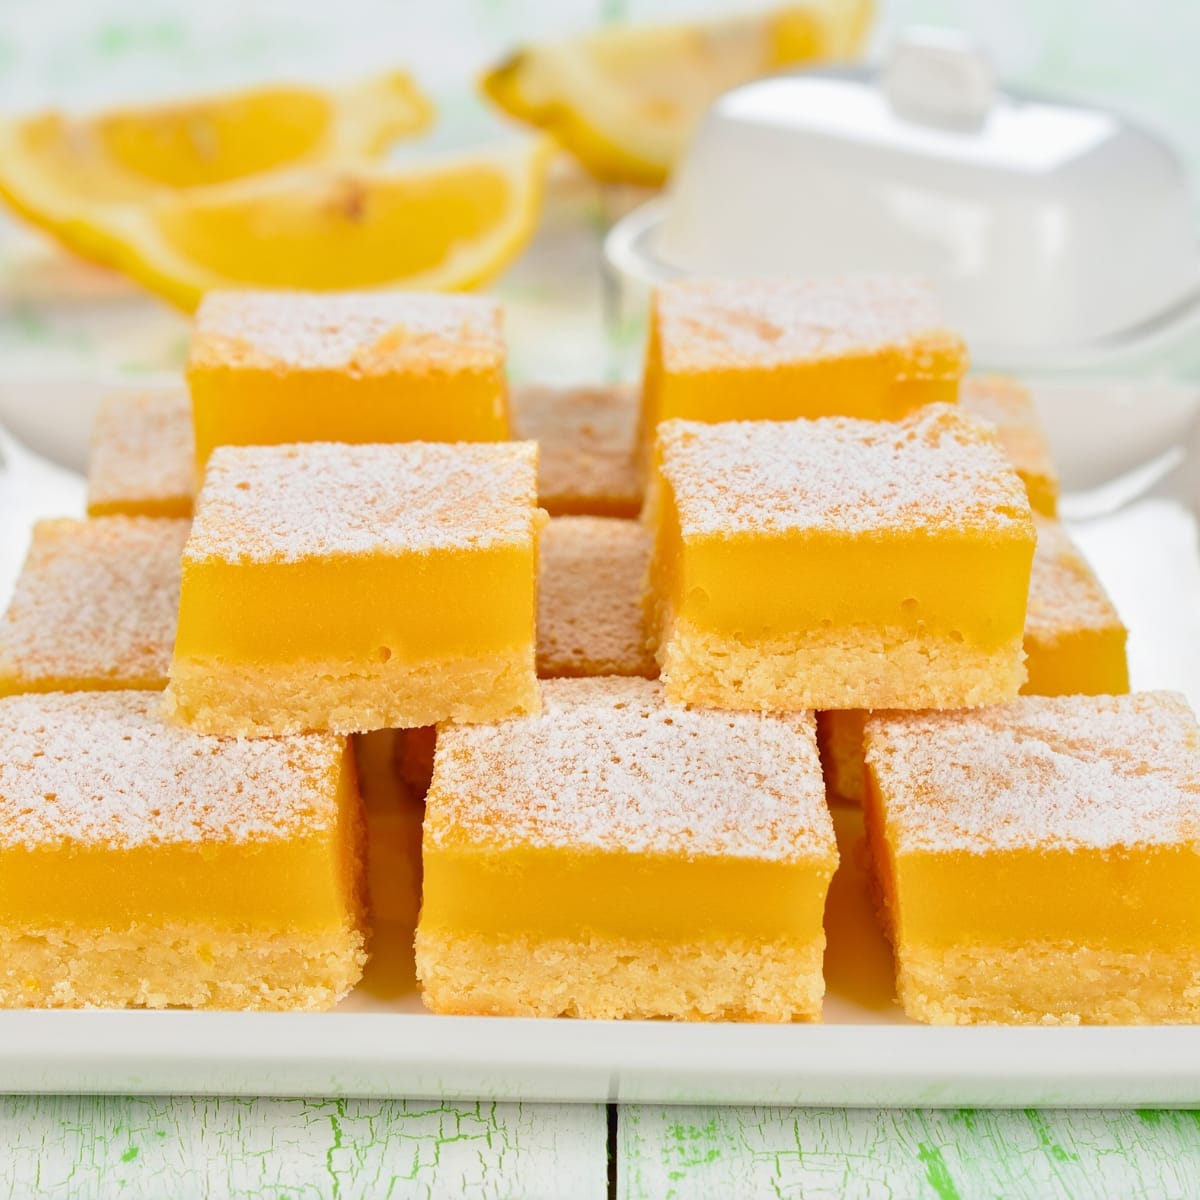 Lemon bars dusted with powdered sugar on top arranged on a plate.